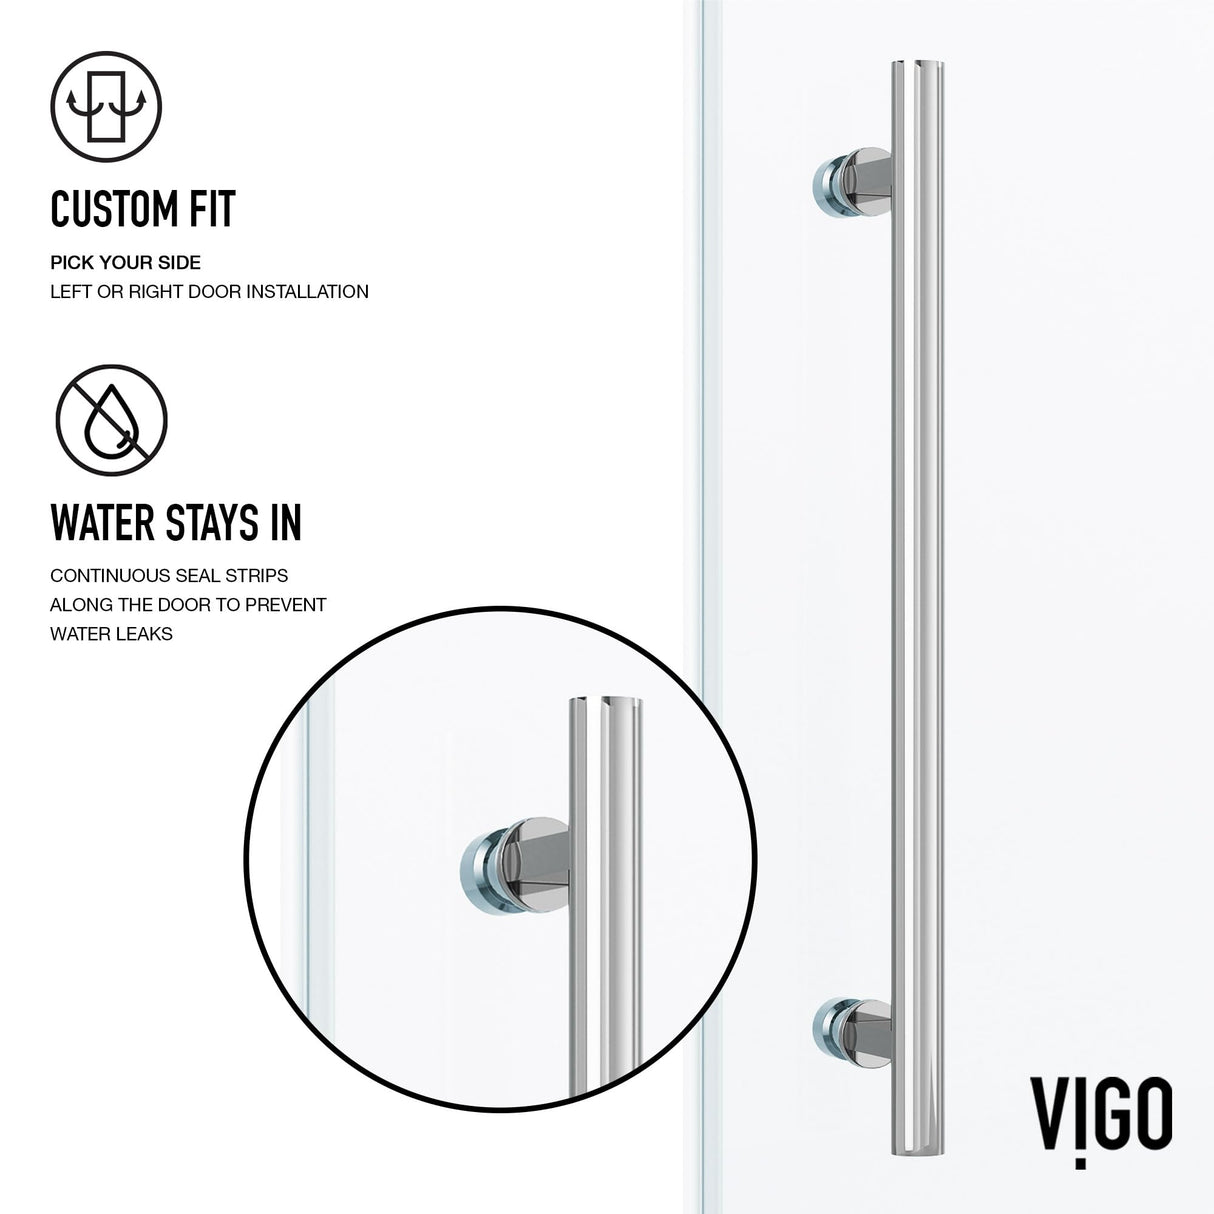 VIGO Adjustable 48 - 52 in. W x 74 in. H Frameless Sliding Rectangle Shower Door with Clear Tempered Glass and Stainless Steel Hardware in Chrome Finish with Reversible Handle - VG6041CHCL5274